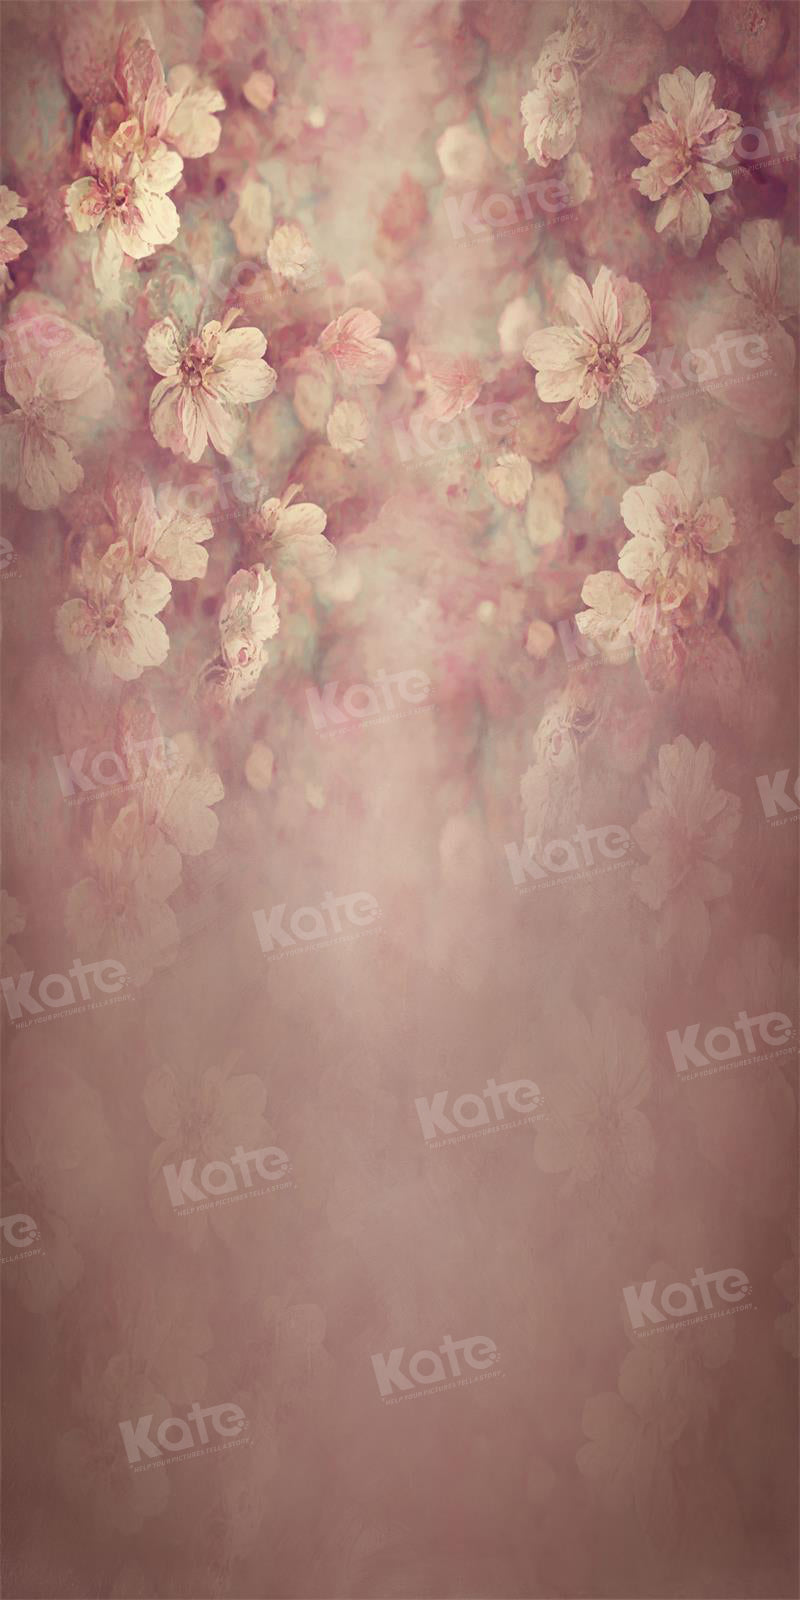 Kate Sweep Flower Backdrop Fine Art for Photography